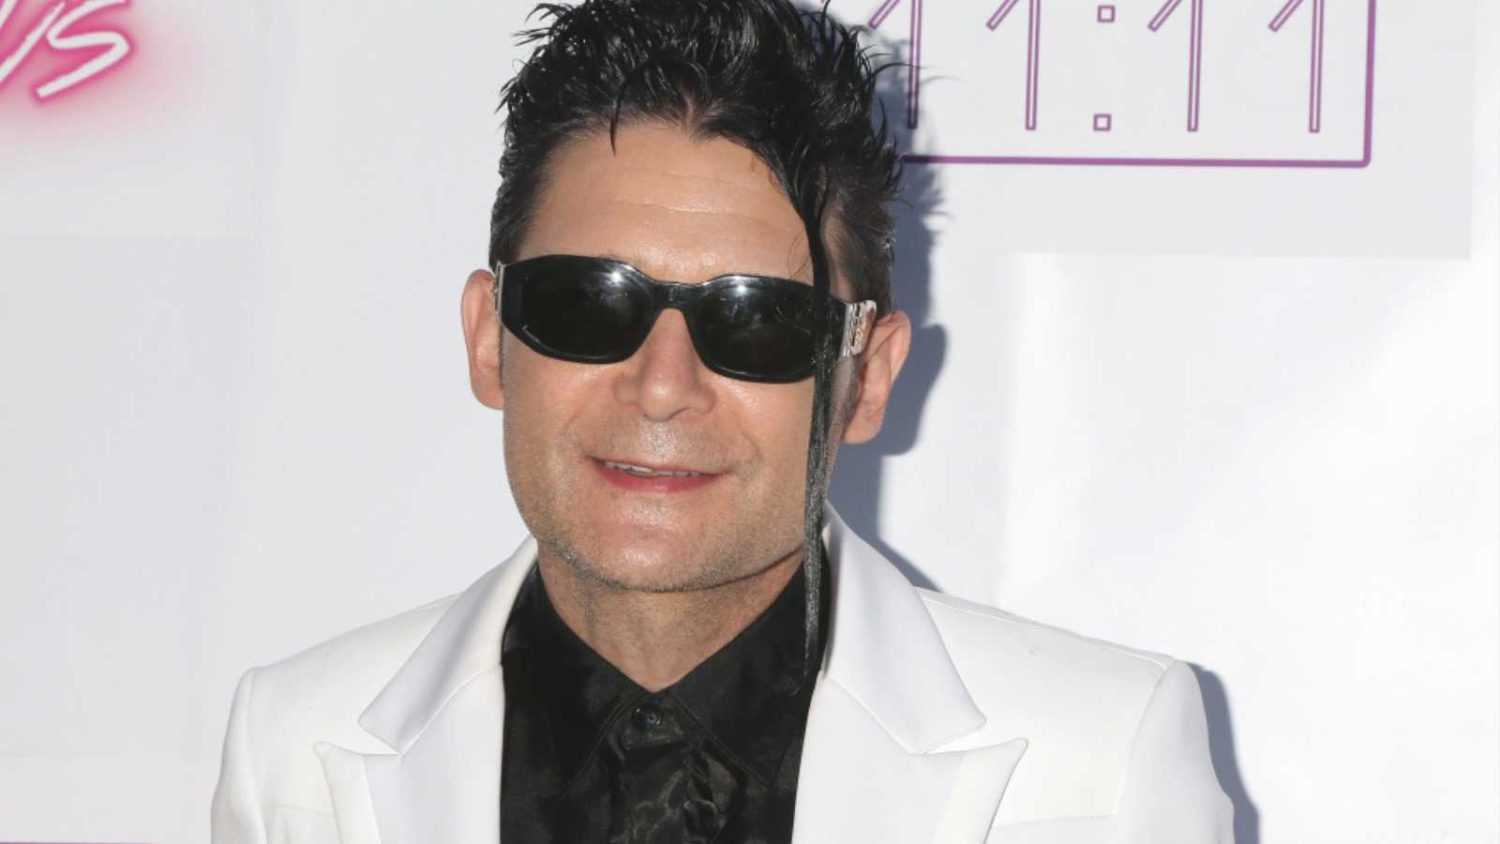 LOS ANGELES - JUN 9: Corey Feldman at the "Famous" A Play By Michael Leoni - Arrivals at the The 11:11 Experience on June 9, 2019 in West Hollywood, CA